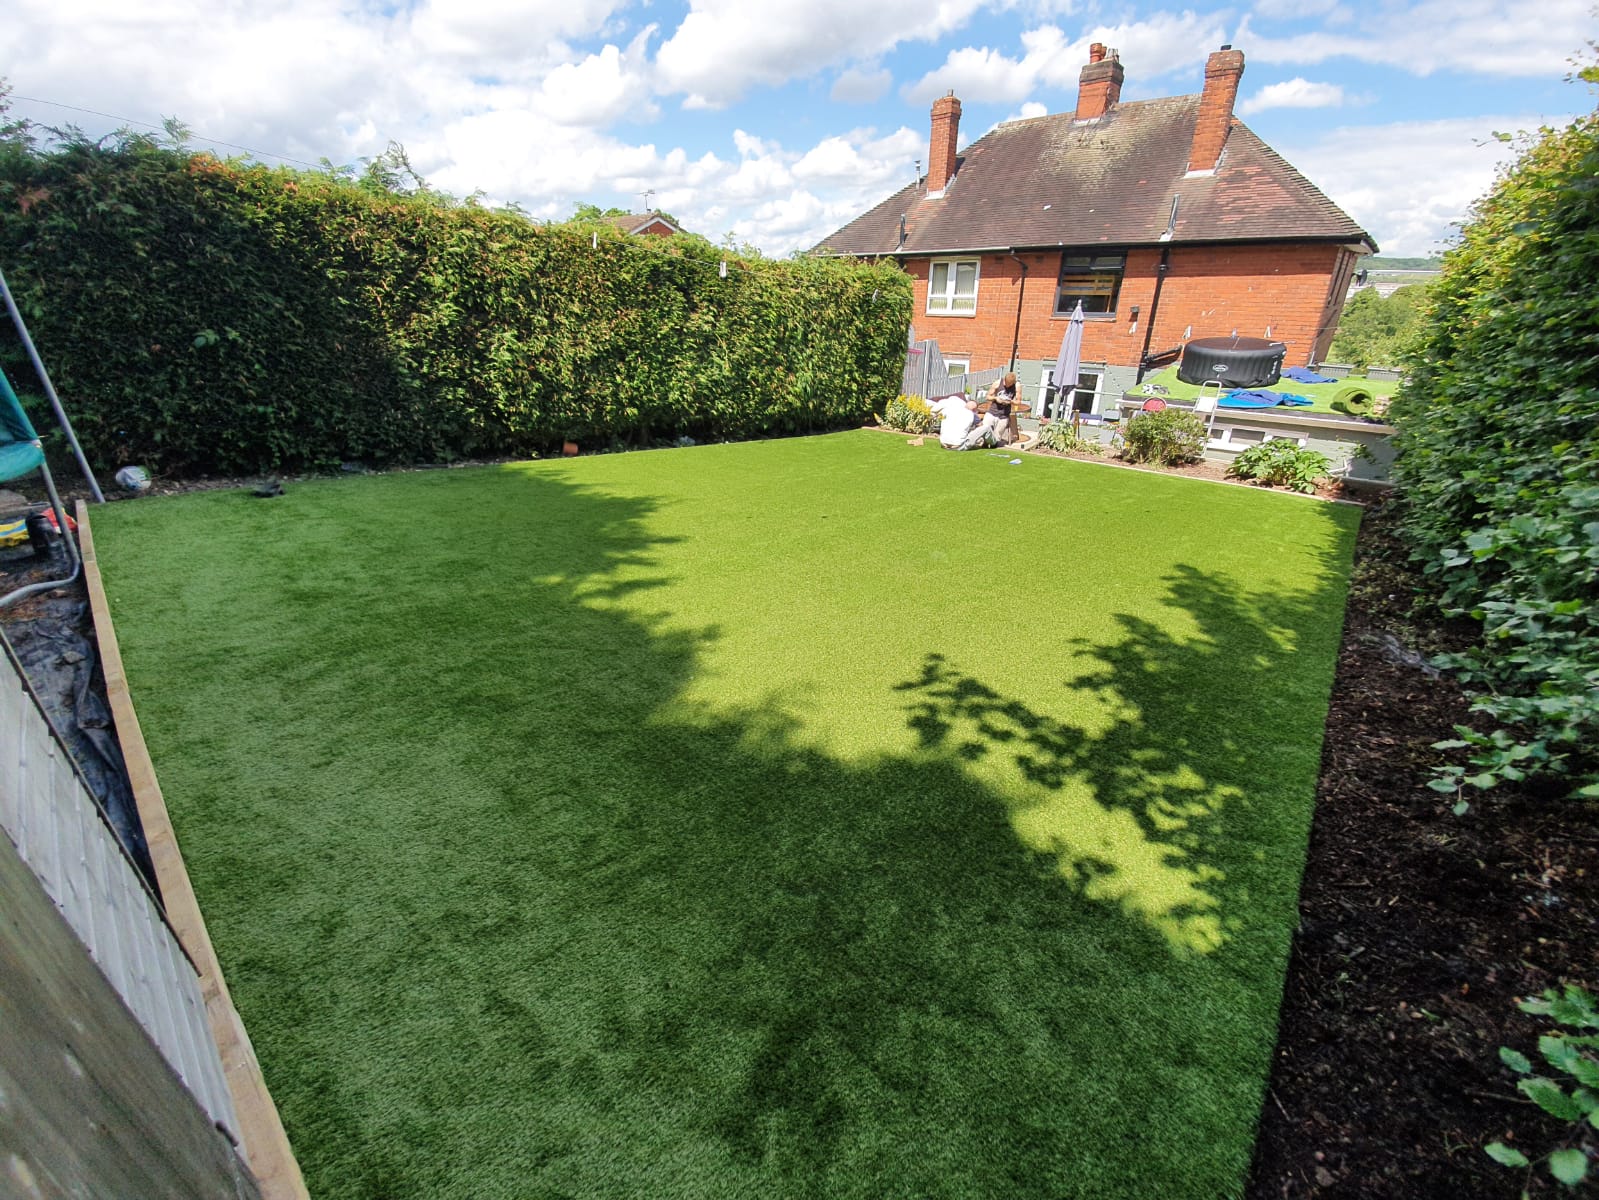 completed new the artificial grass lawn in Chesterfield